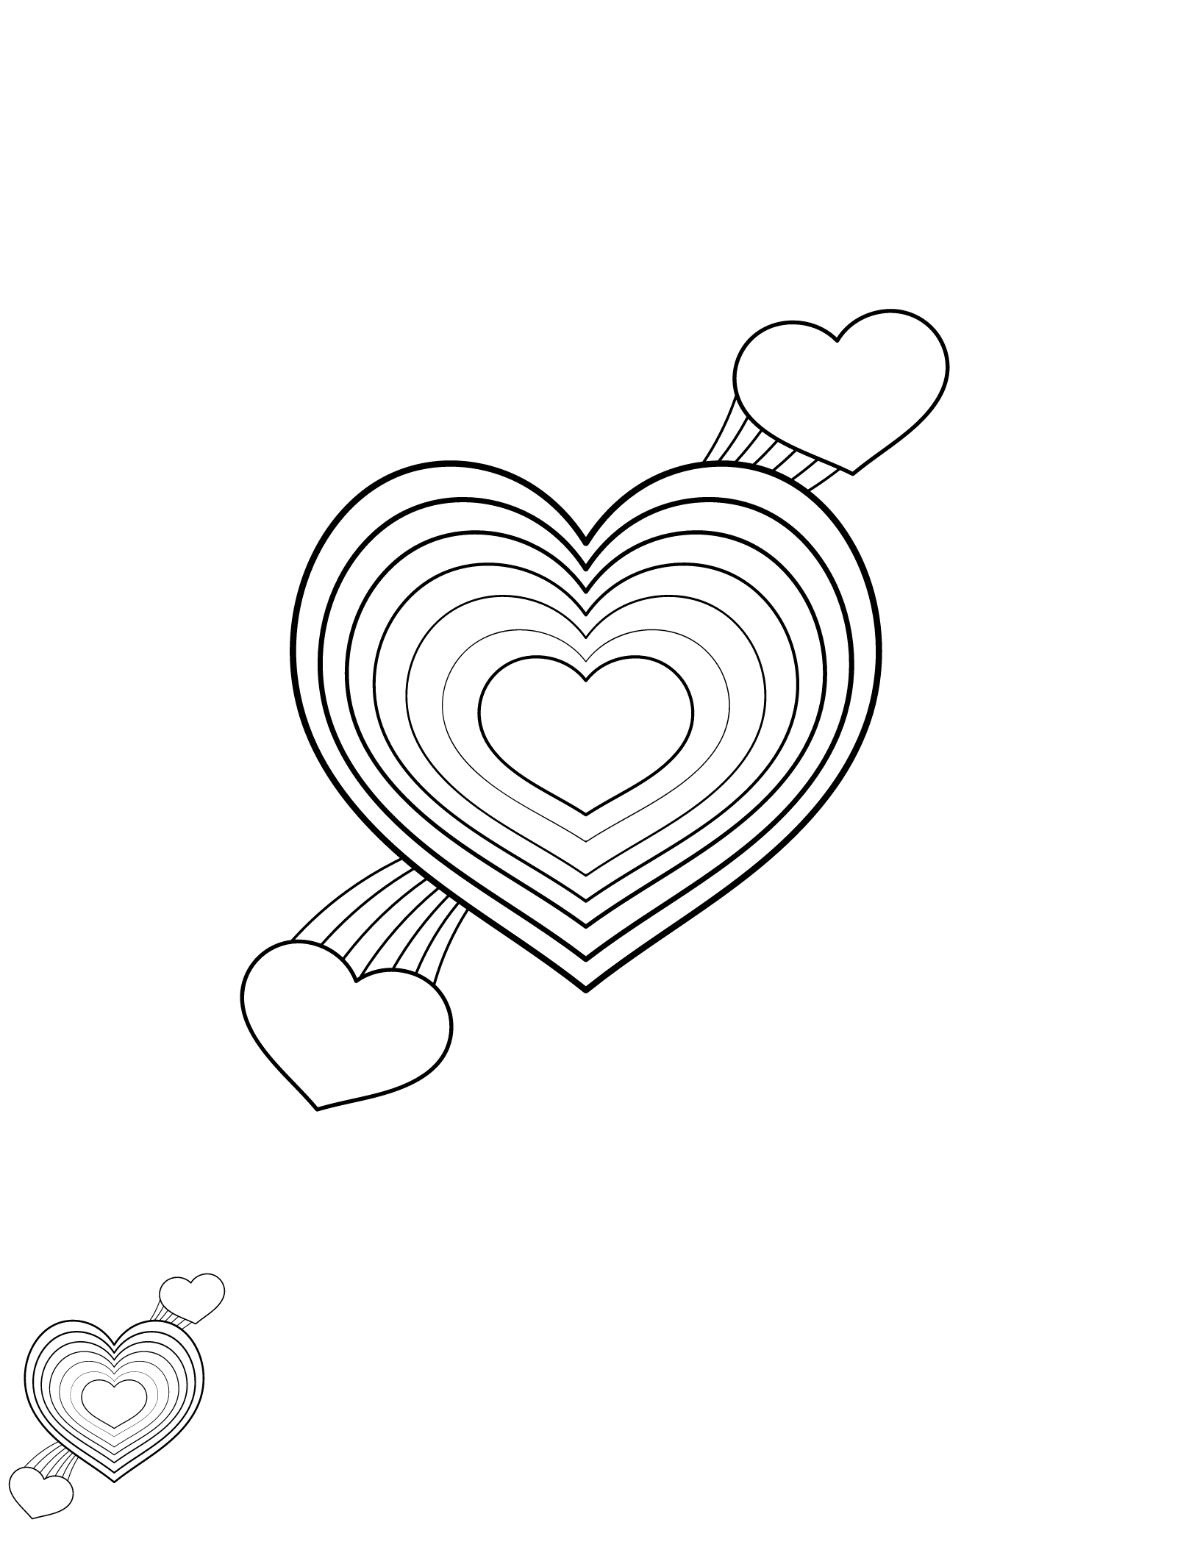 Rainbow Heart Coloring Page Template